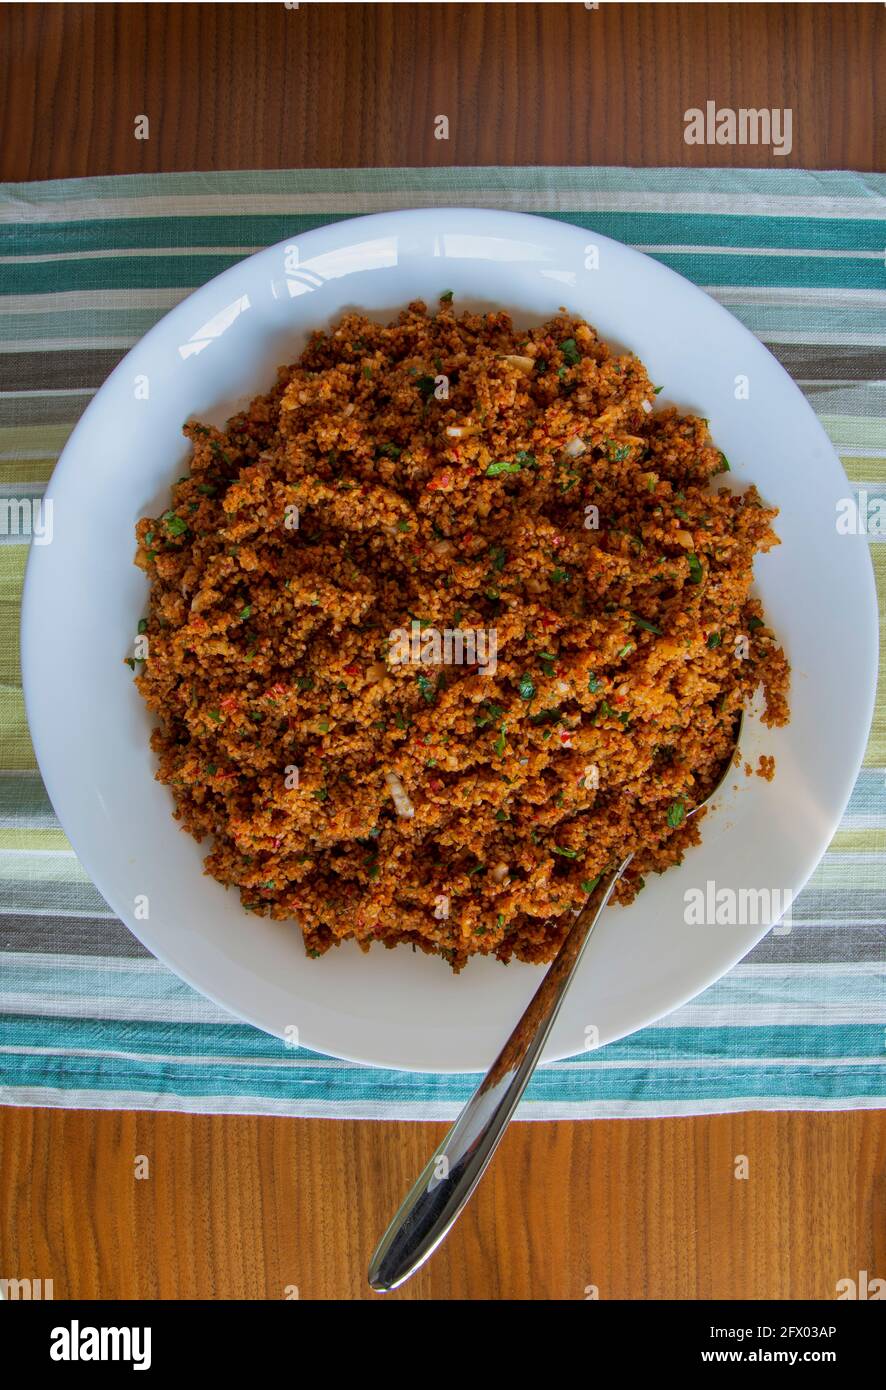 an aperitif from traditional Turkish cuisine; Kısır made with crushed wheat, tomato paste and finely chopped greens. Top view. Stock Photo